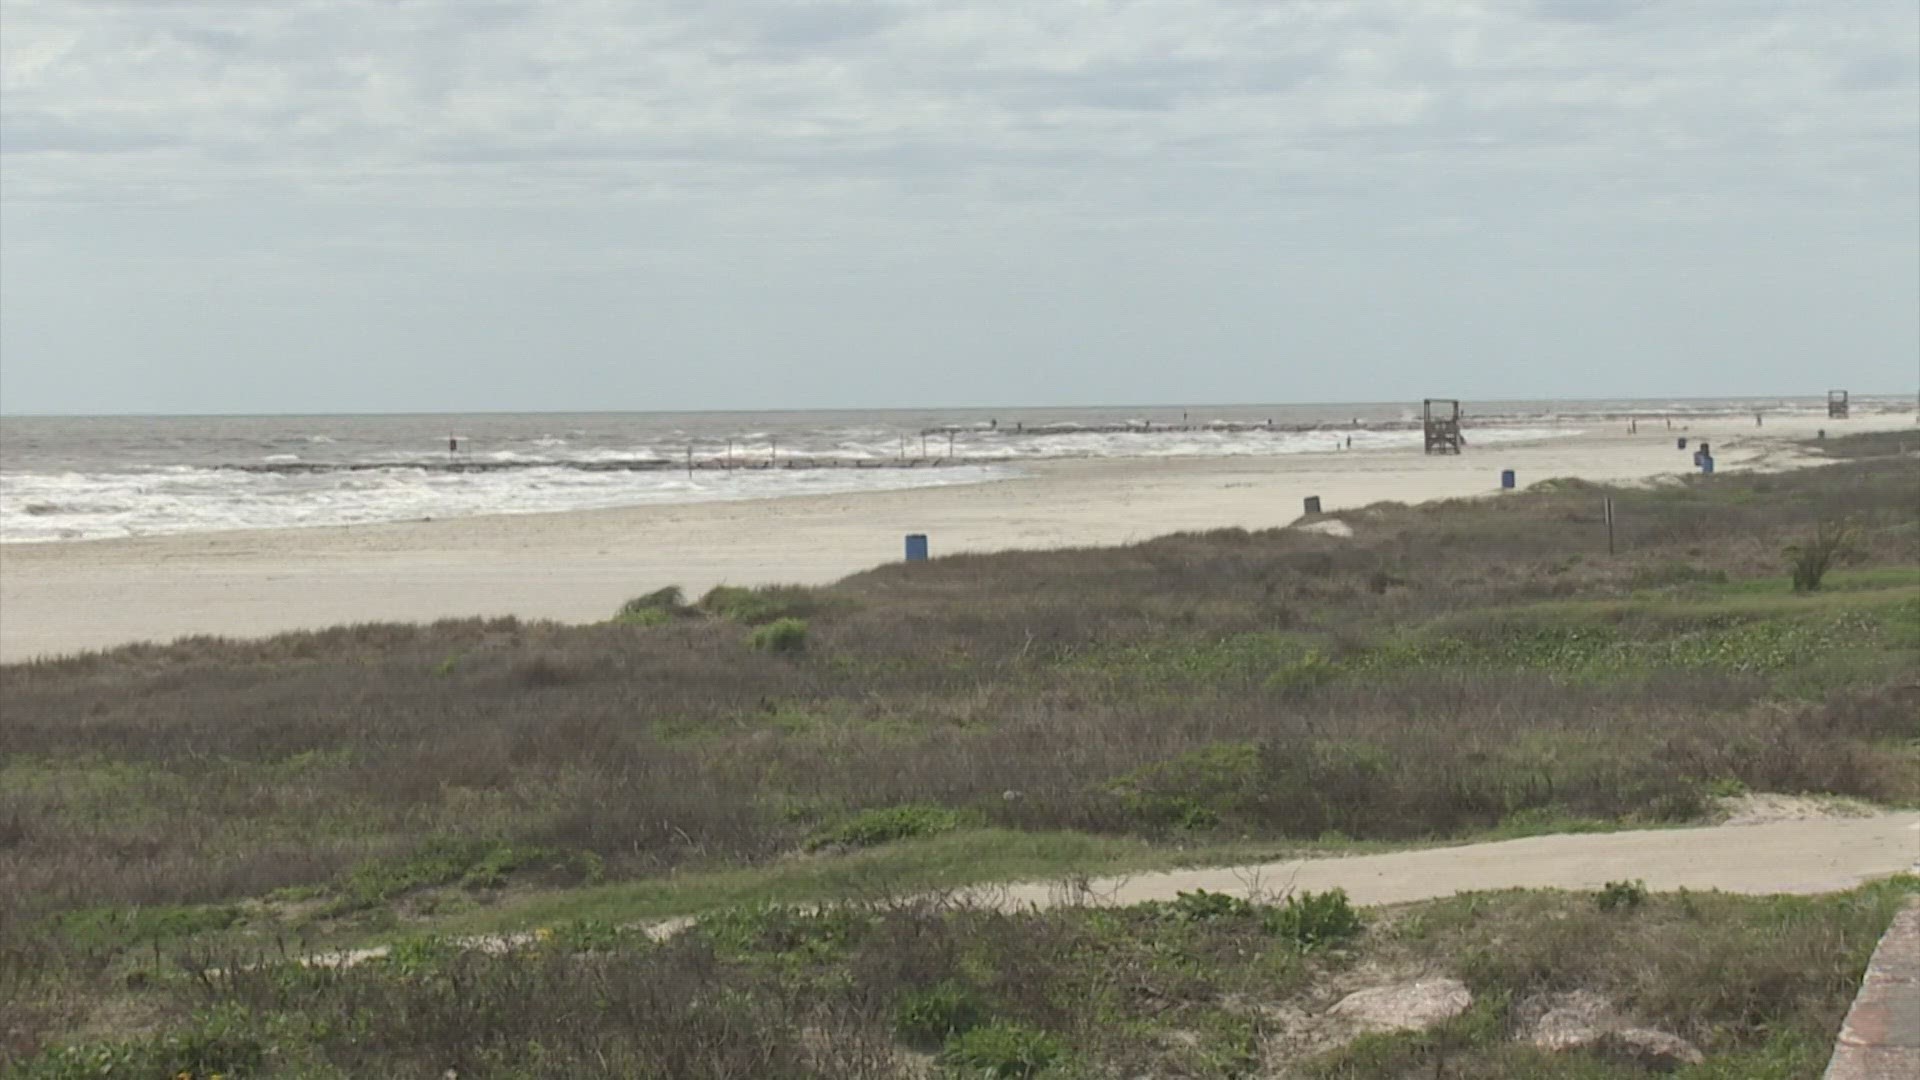 Beaches from La Porte to Galveston and down to Corpus Christi are infested with fecal matter, according to a new study.